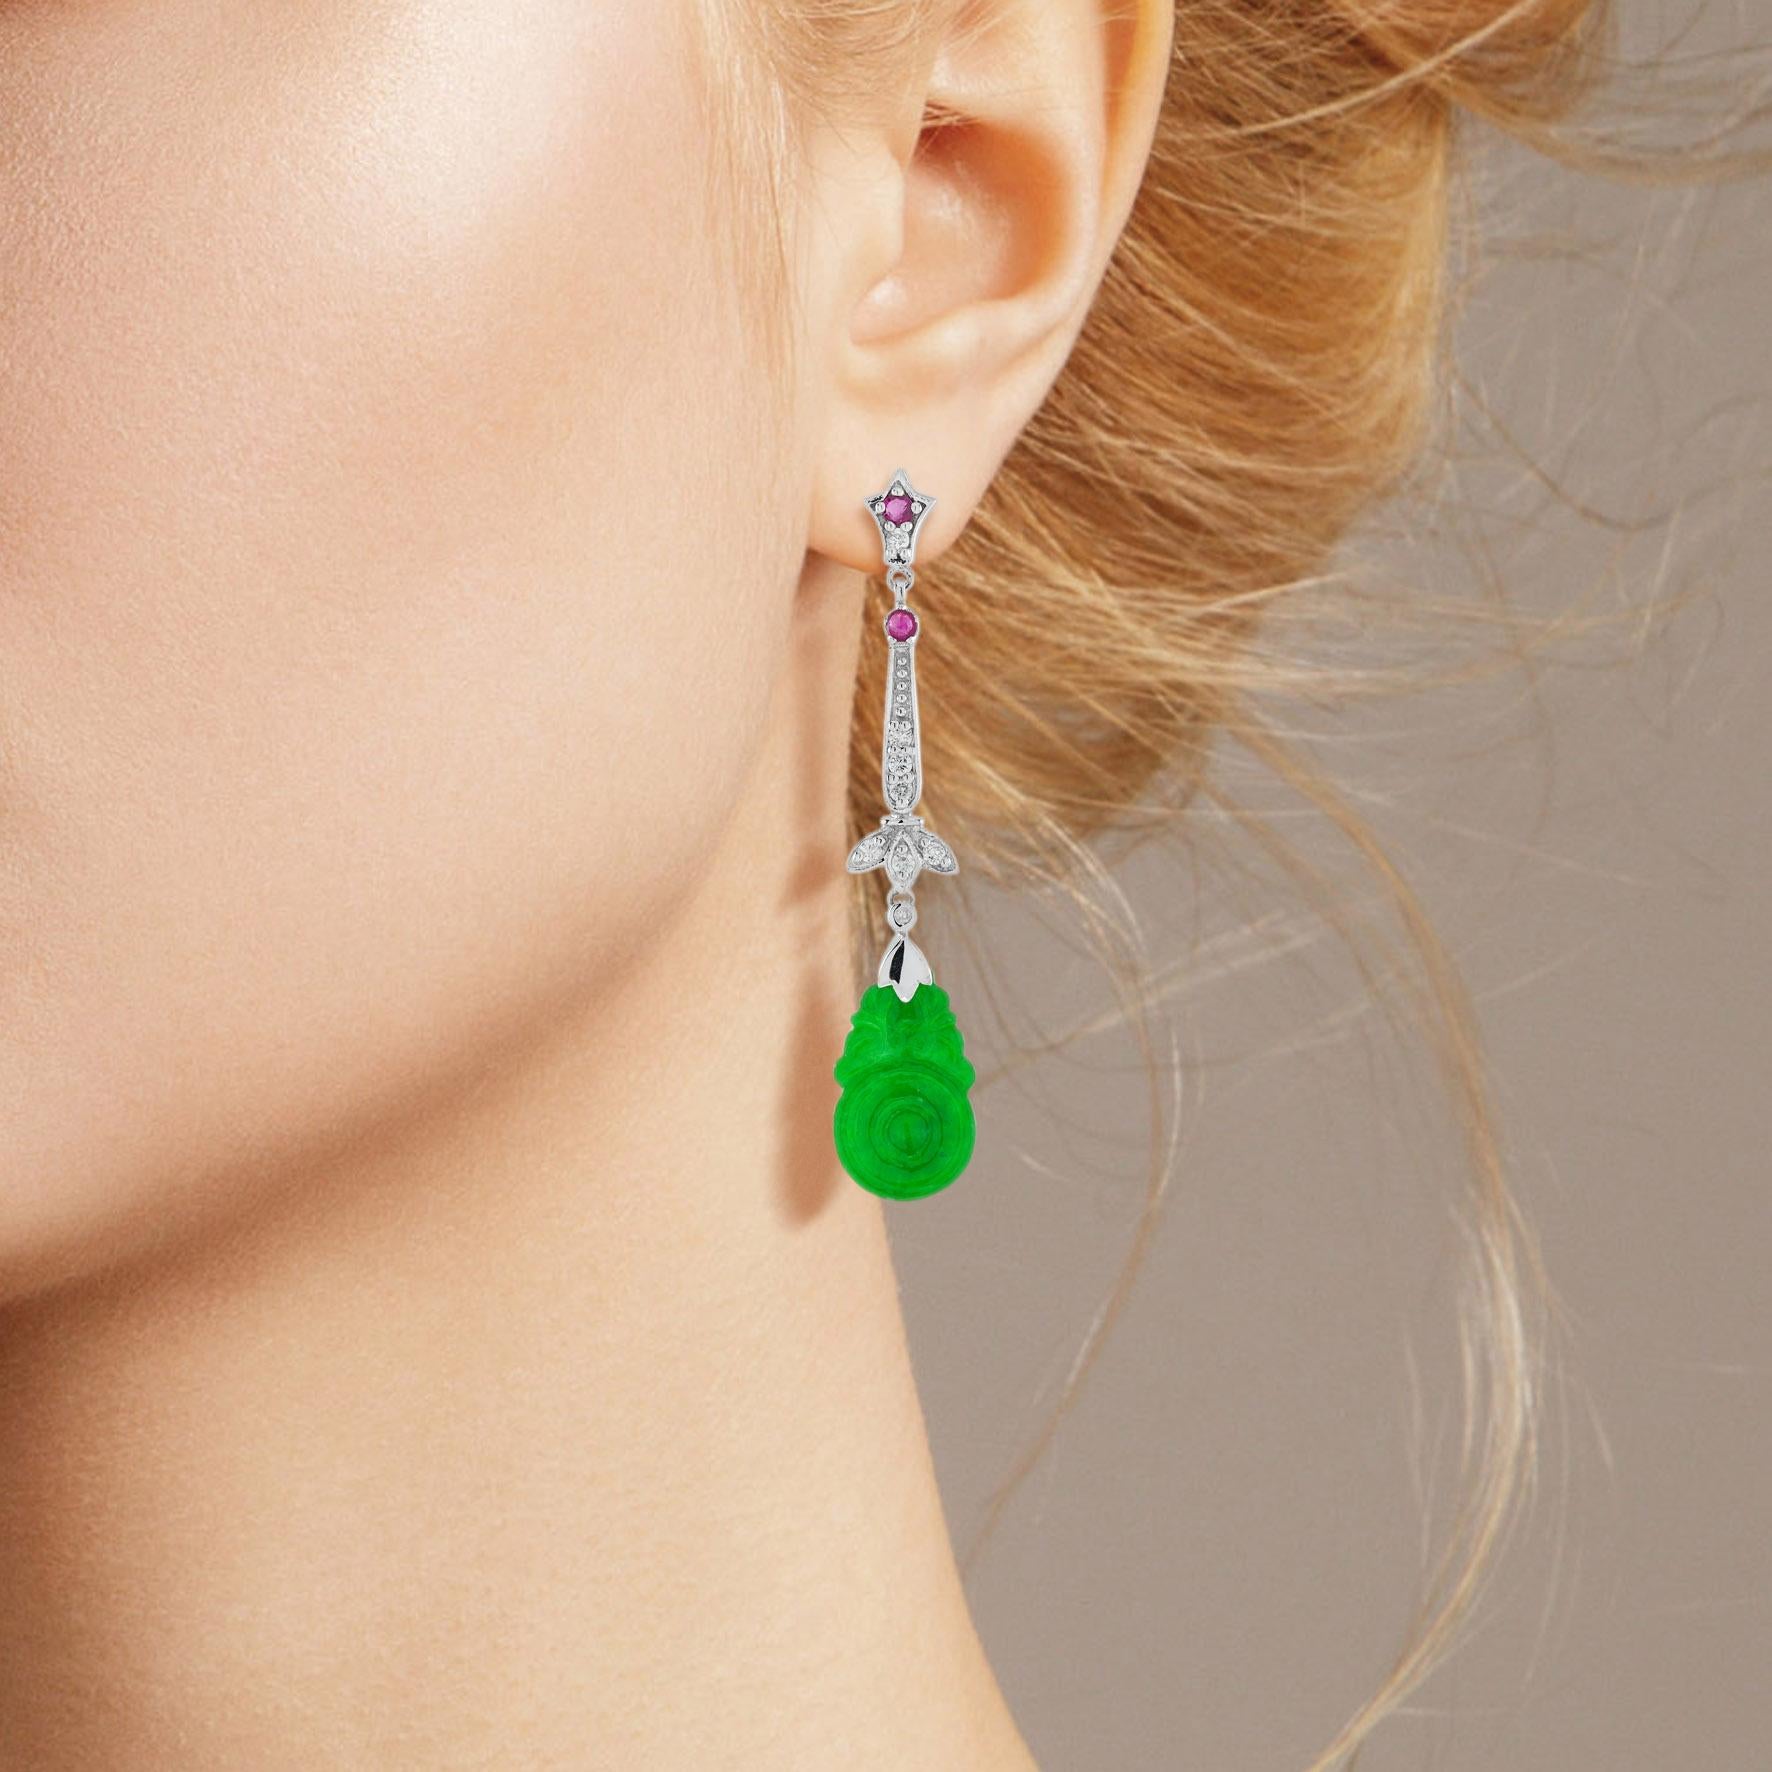 The natural jade in these lovely earrings has some very special shape. Both pieces have a strong green color and well orange fruit carvings. The jade is suspended in a 9k white gold setting with diamond leaf and round rubies on the top. The earrings